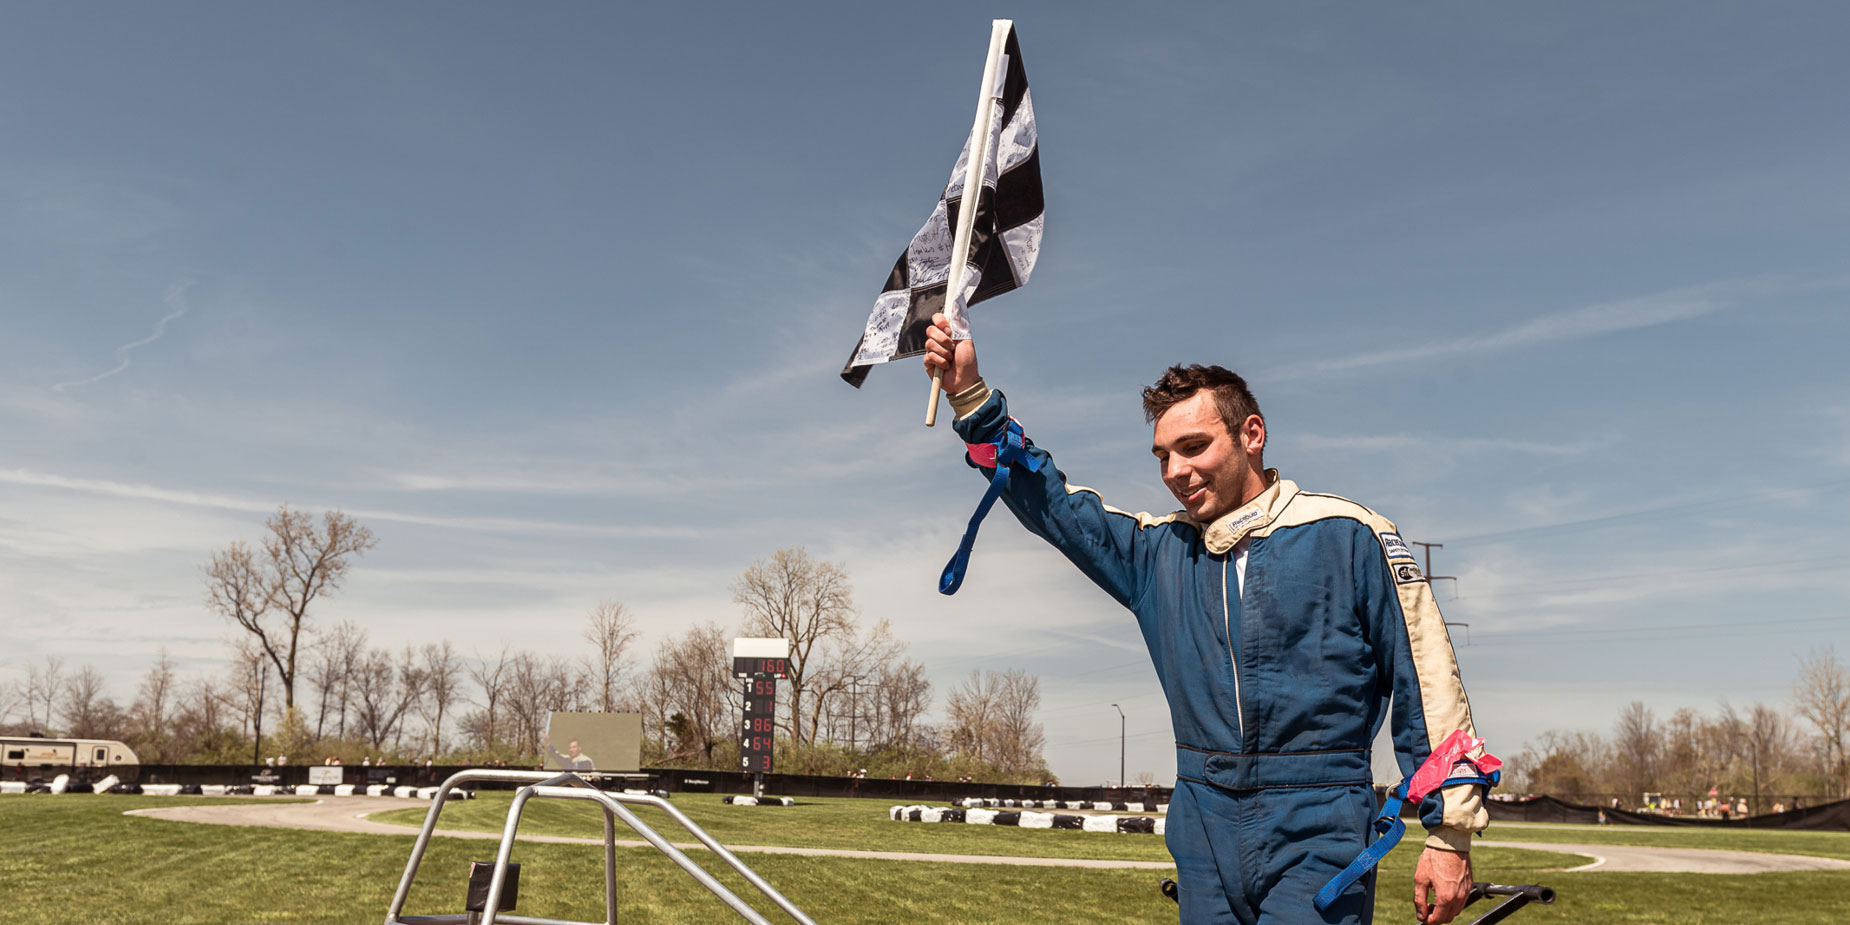 Andrew Kardashian (BS aeronautical engineering AE’22) celebrates winning the 2022 Purdue Grand Prix by waving the checkered flag after his victory.